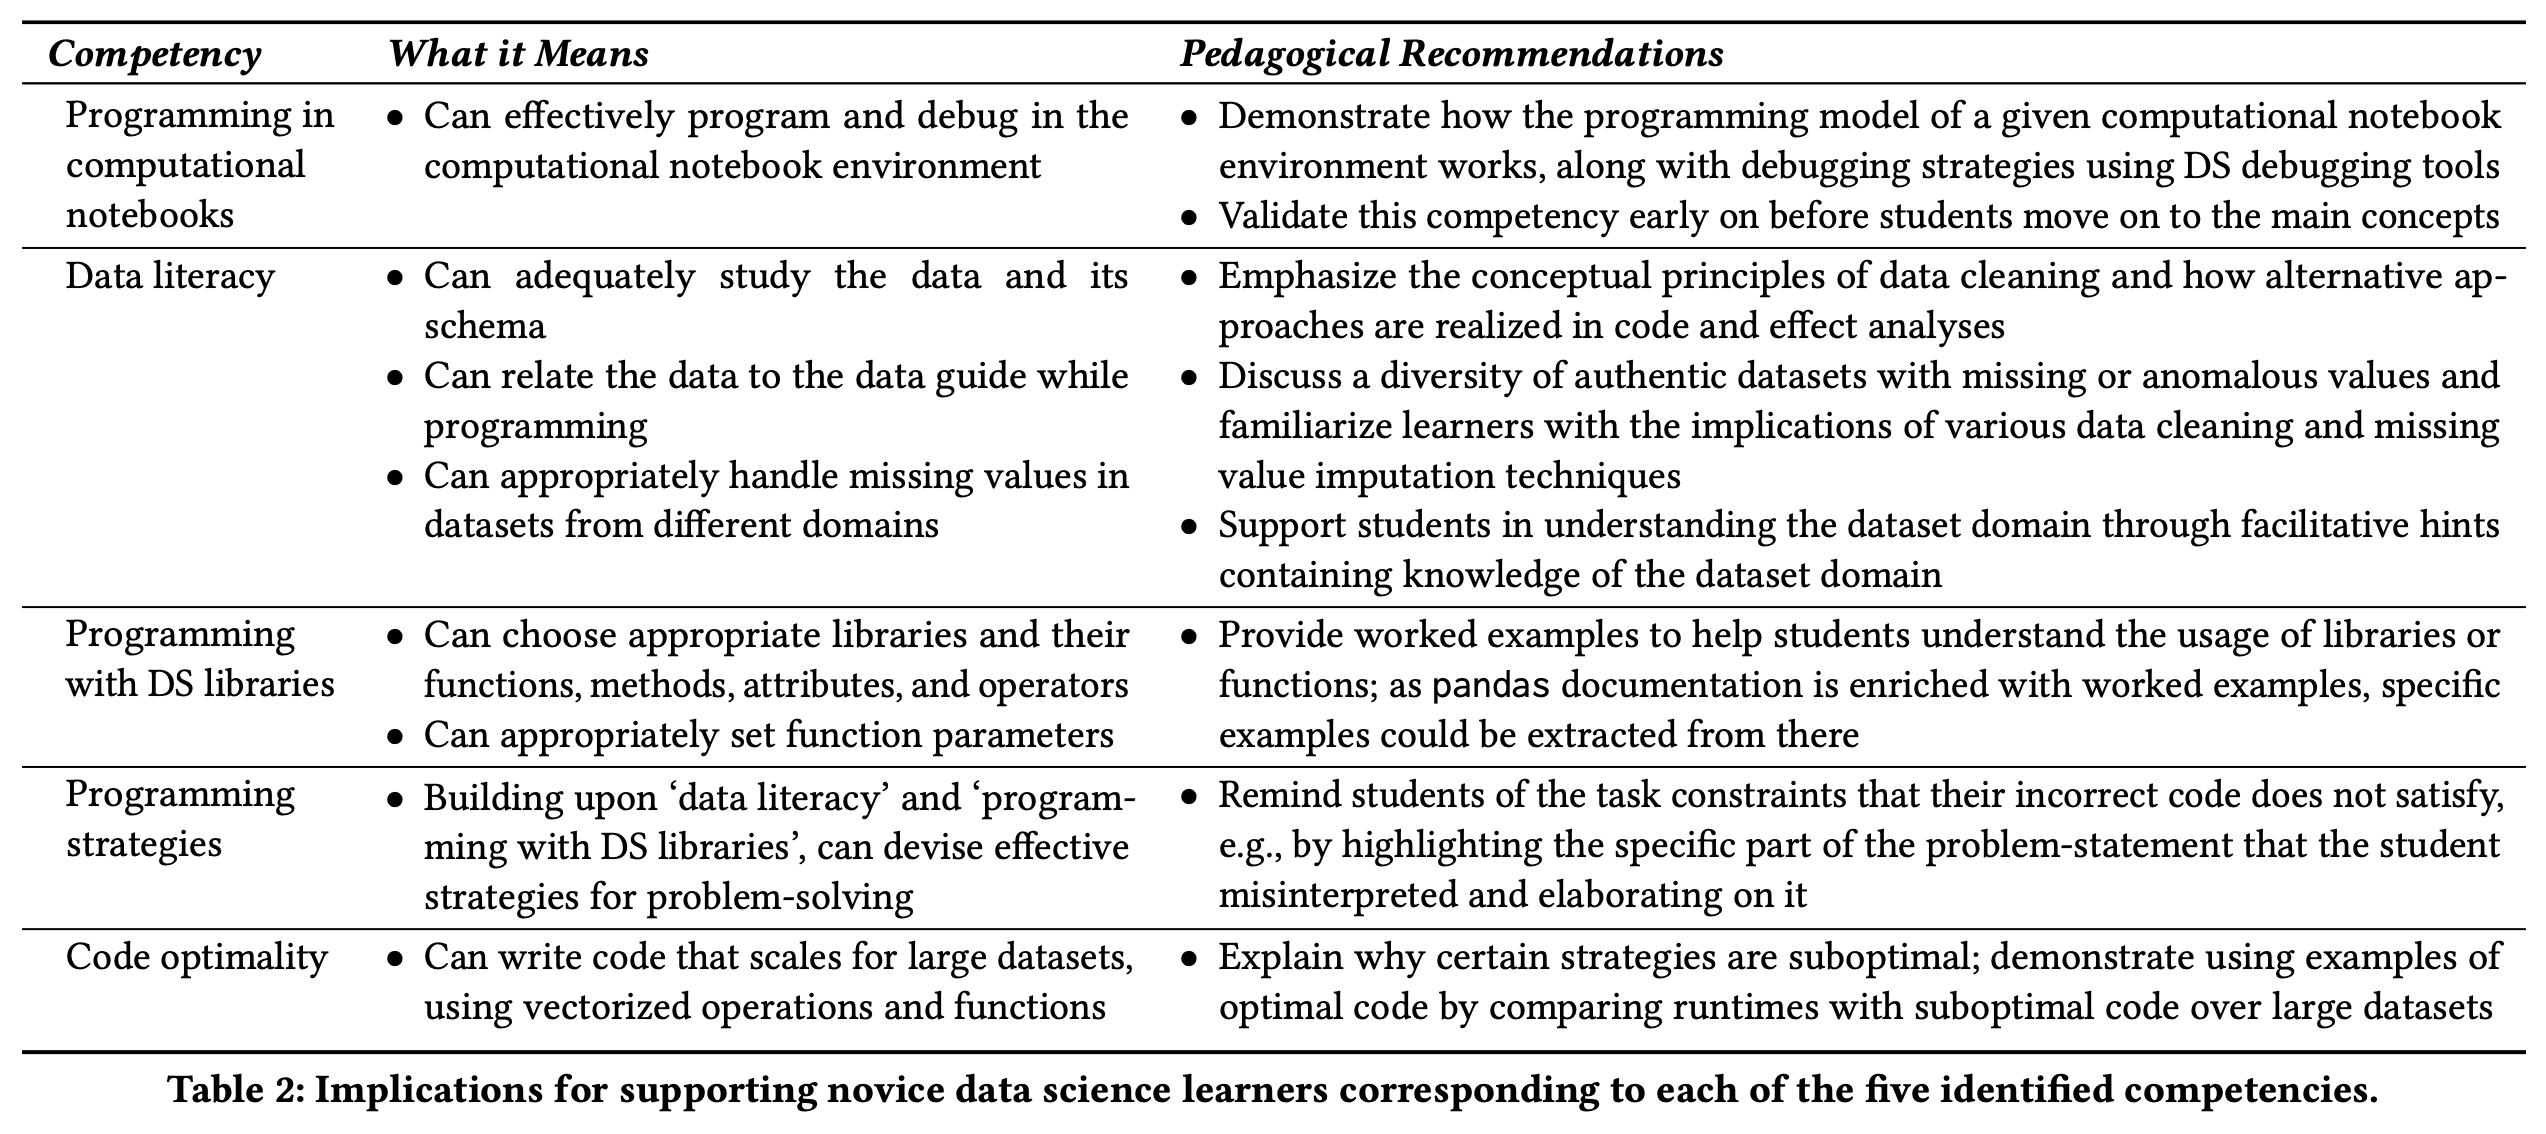 Table 2 from our paper that shows the 5 competencies we identified along with pedagogical recommendations for each.